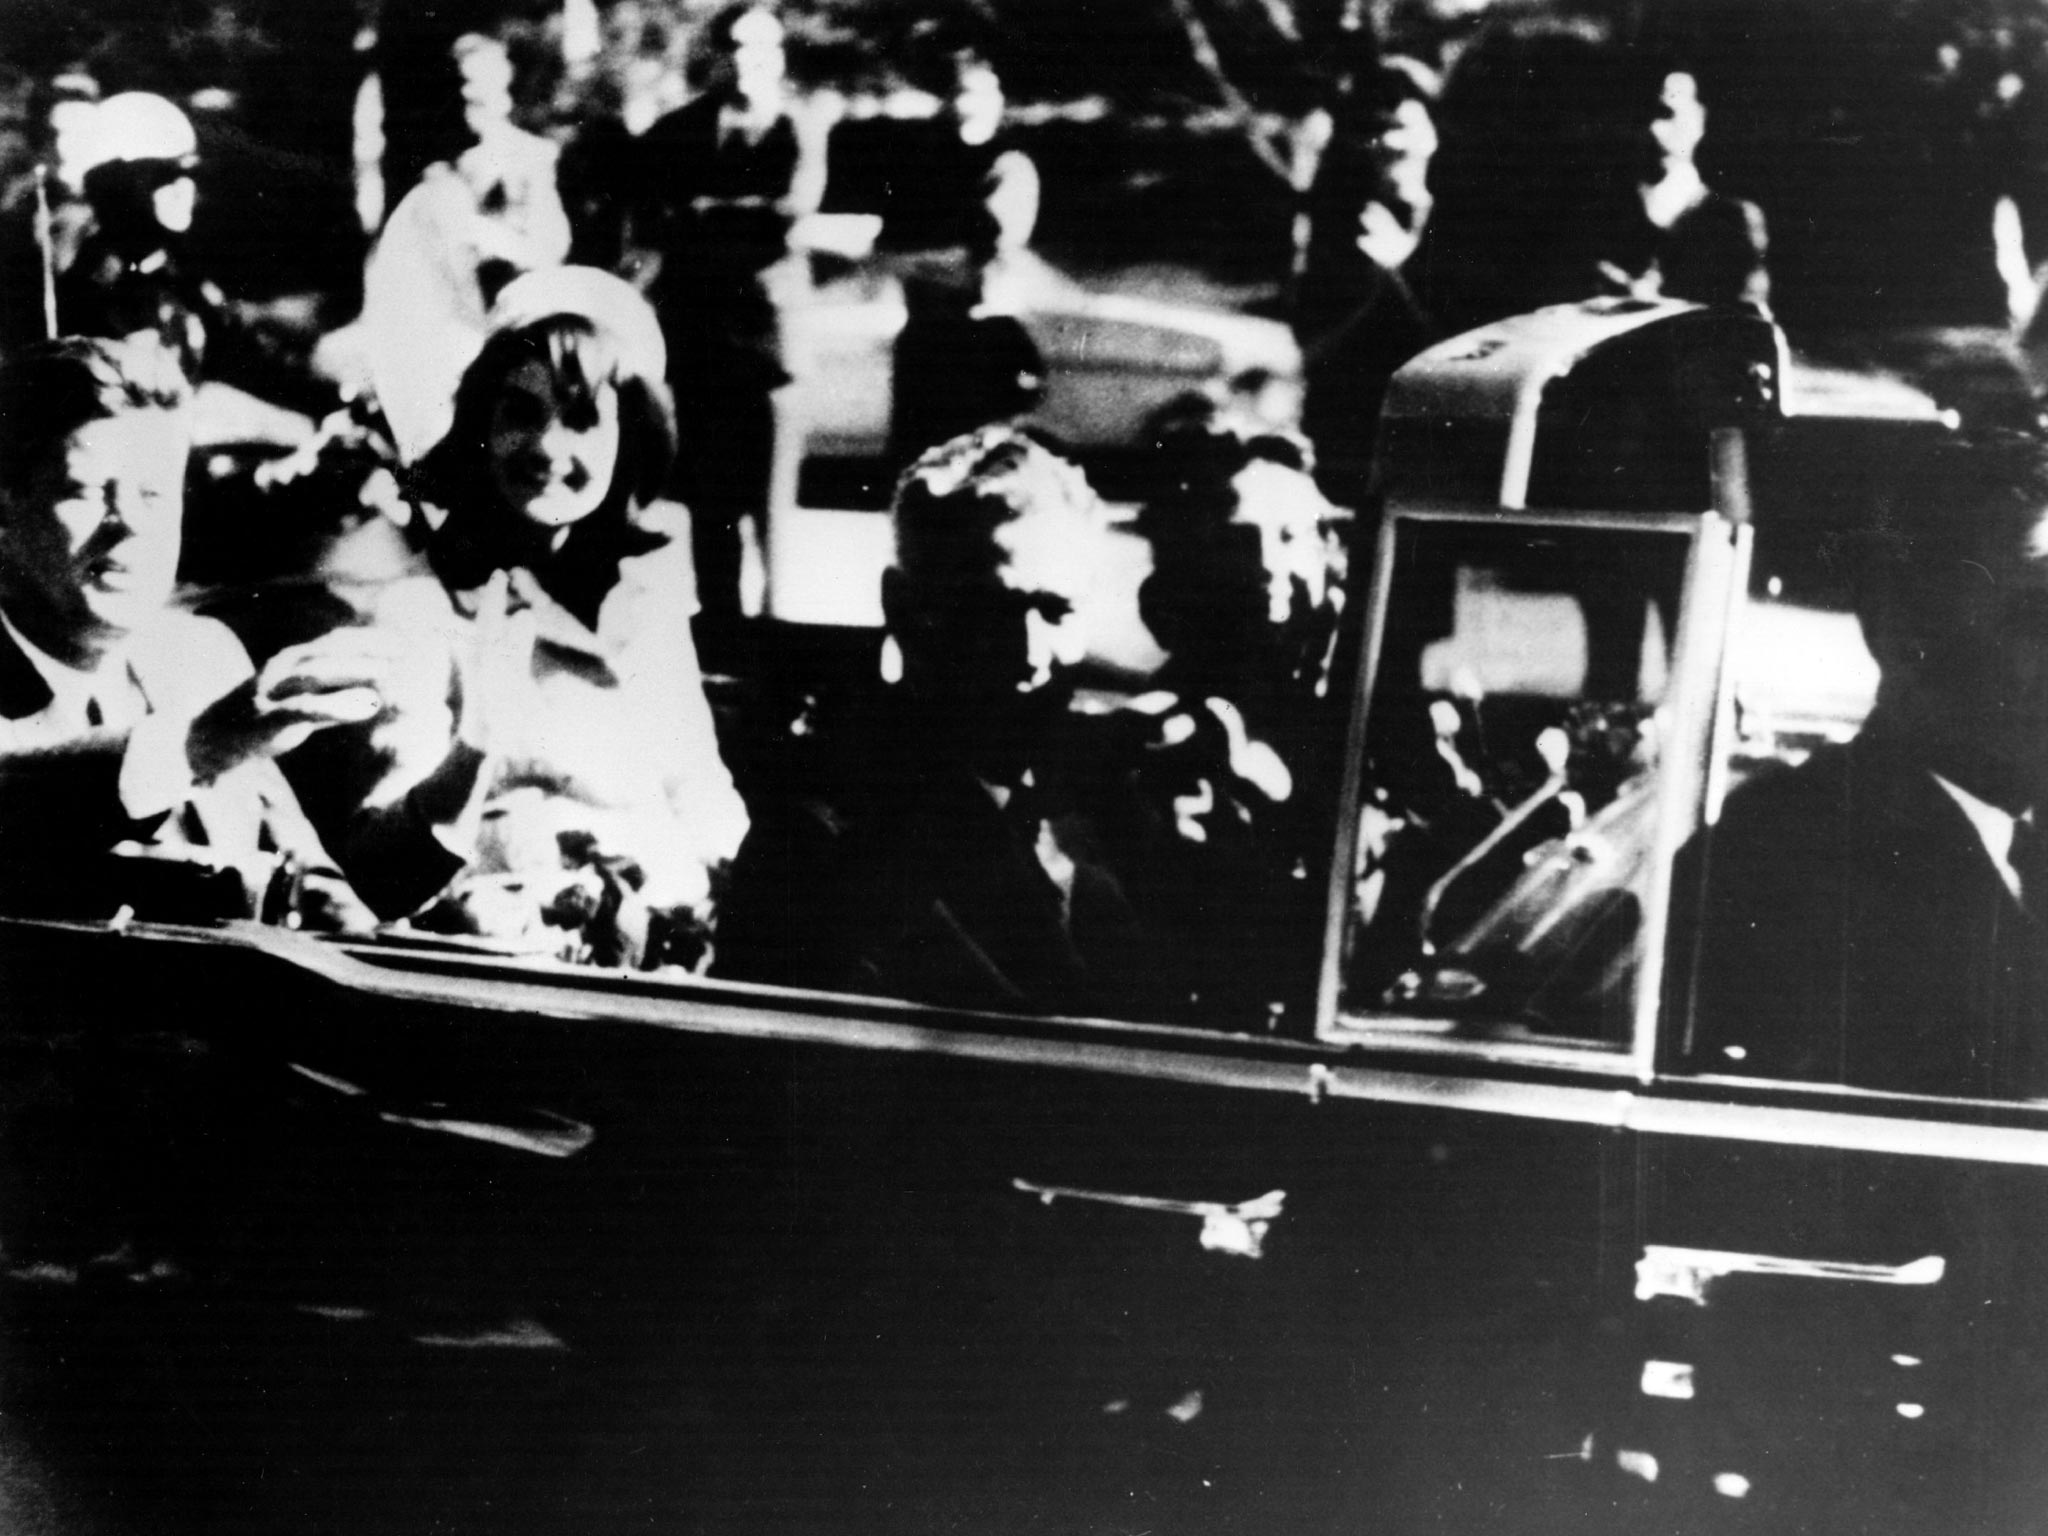 President John F. Kennedy and his wife Jacqueline Kennedy ride with secret agents in an open car motorcade shortly before the president was assassinated in Dallas, Texas